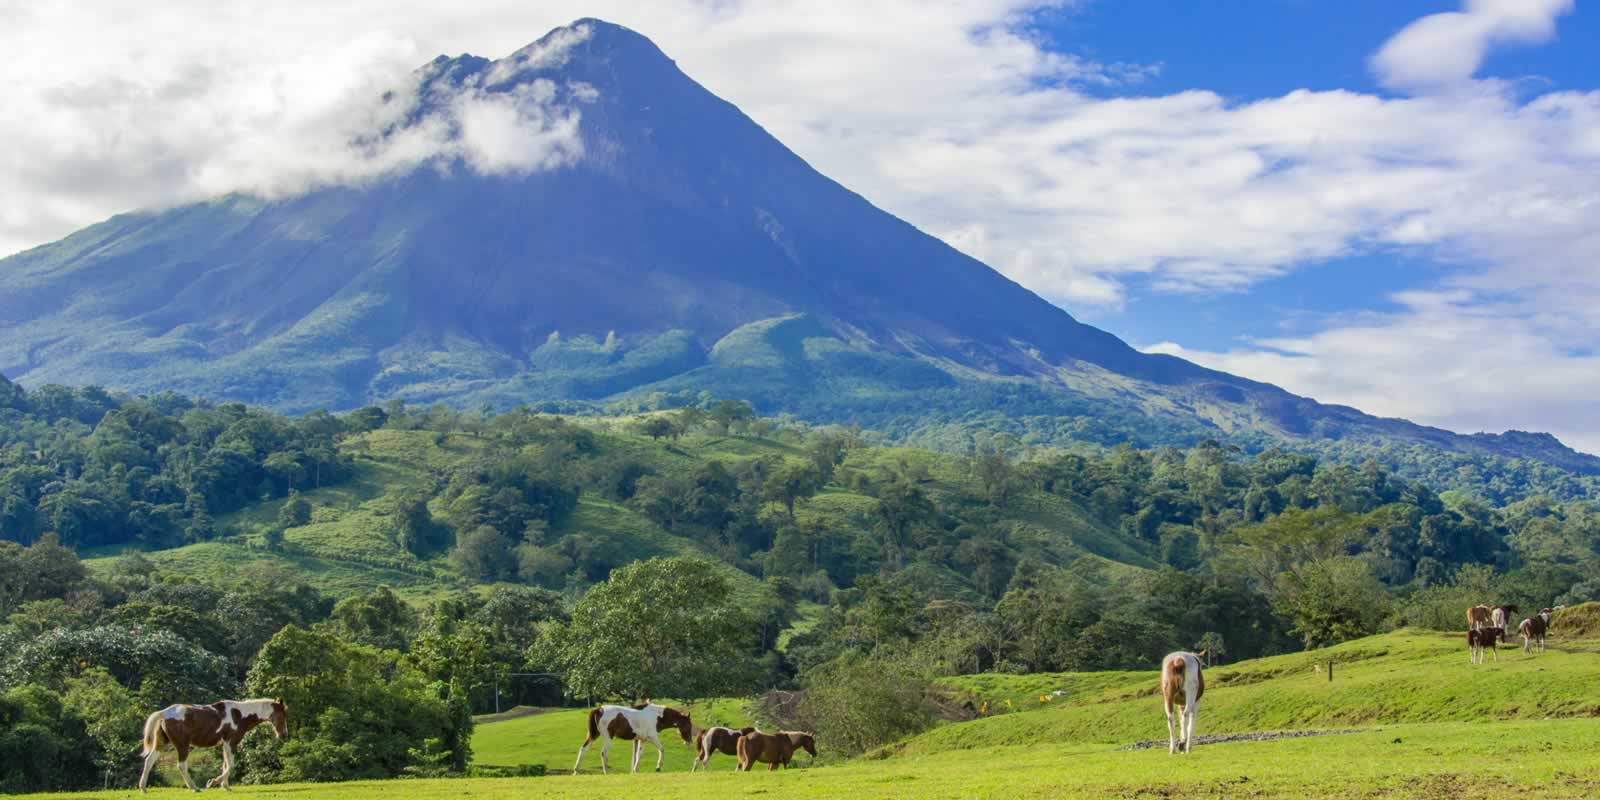 Places to visit in Costa Rica